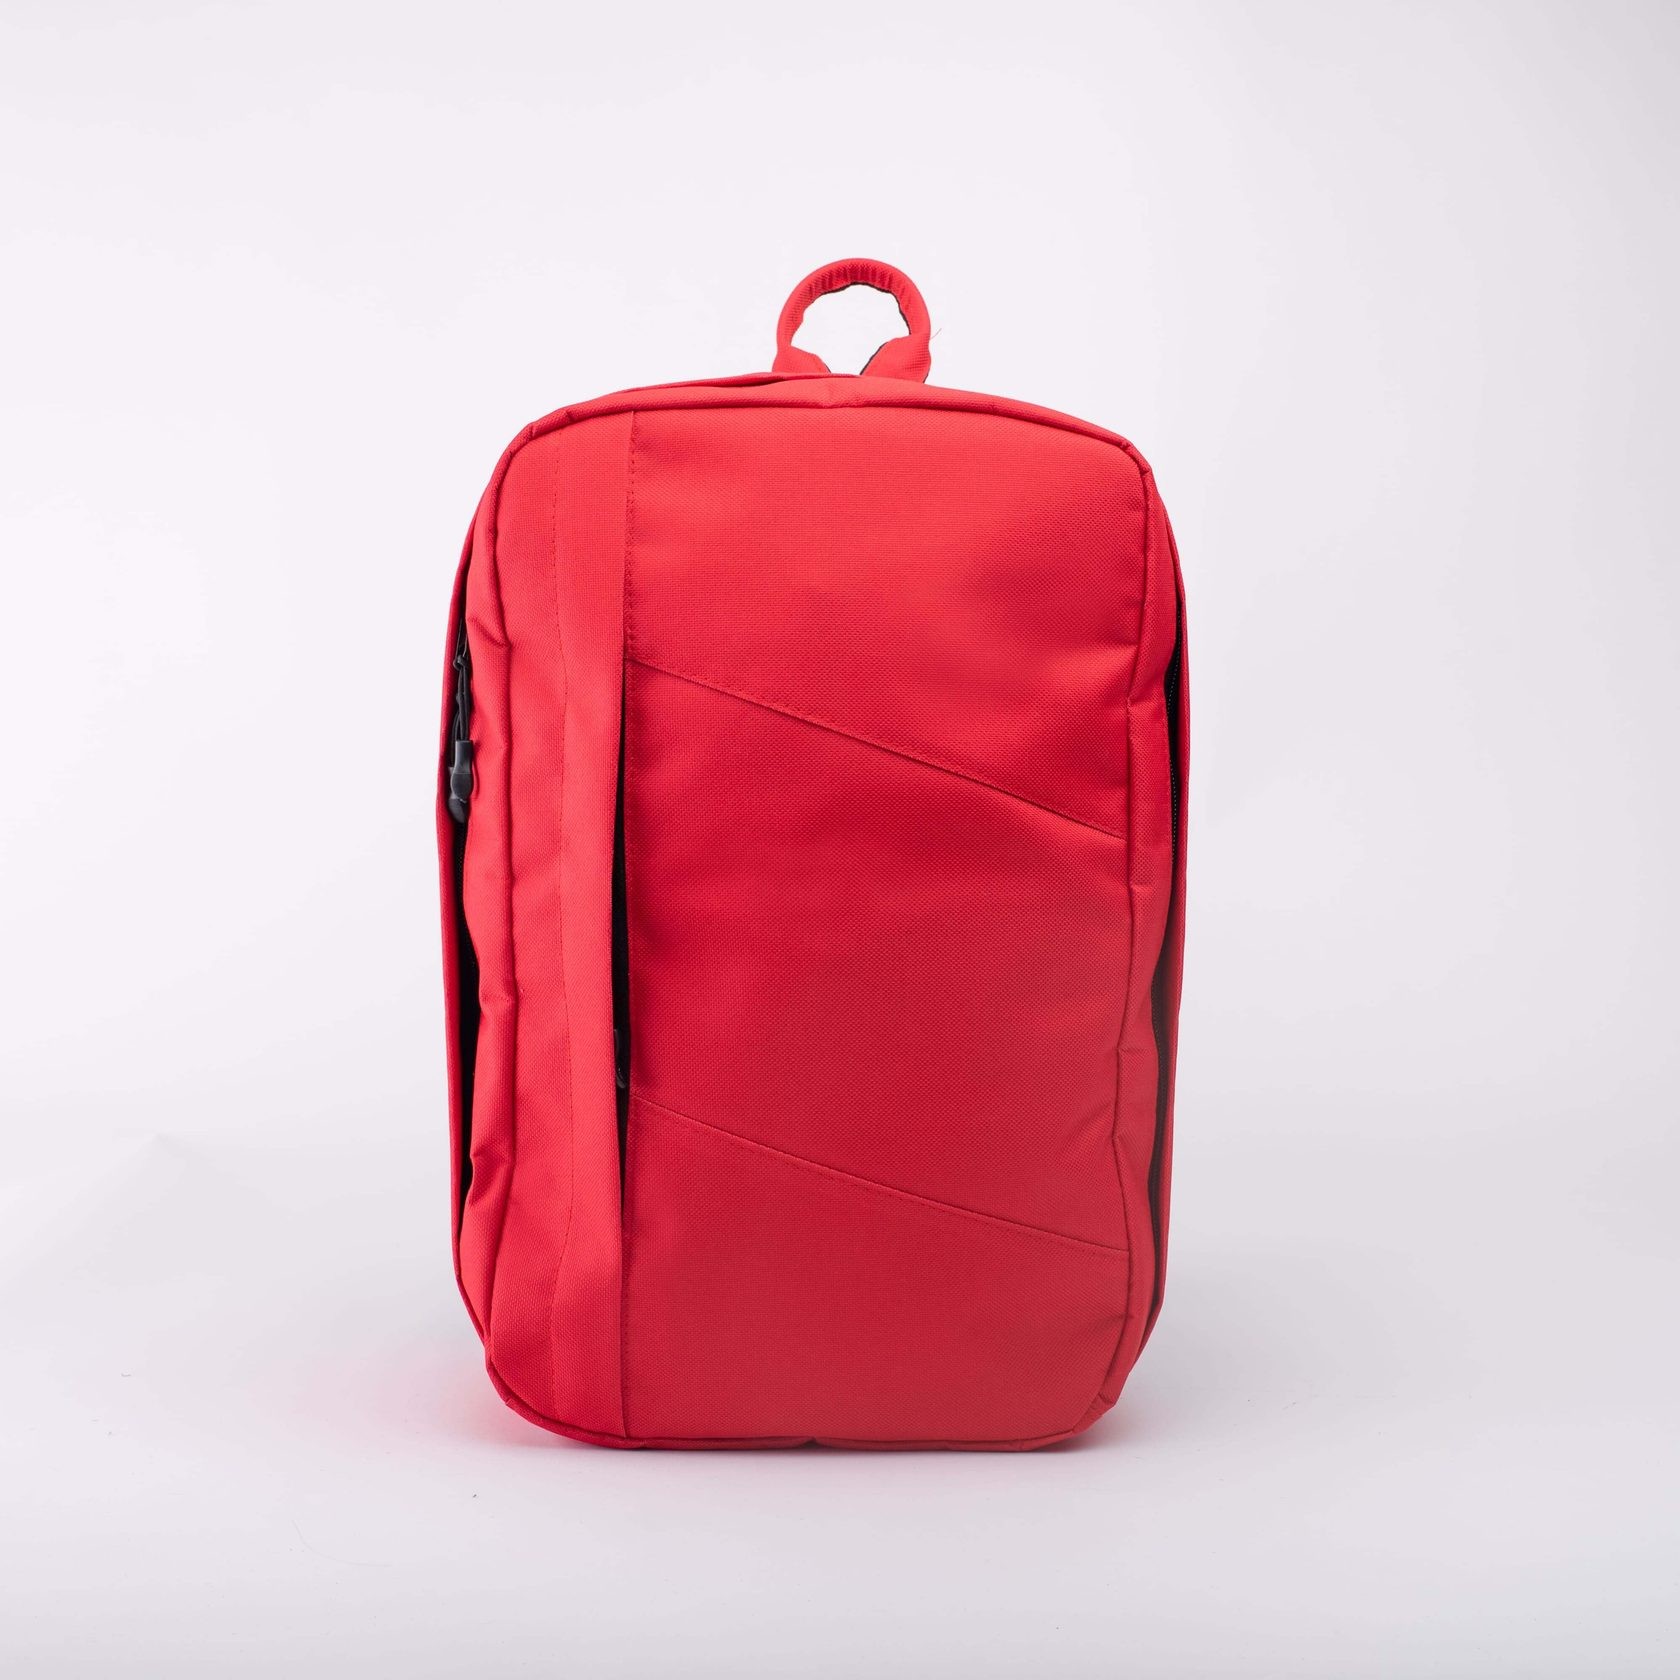 TRVLbag red | hand luggage | backpack 40x20x25 cm